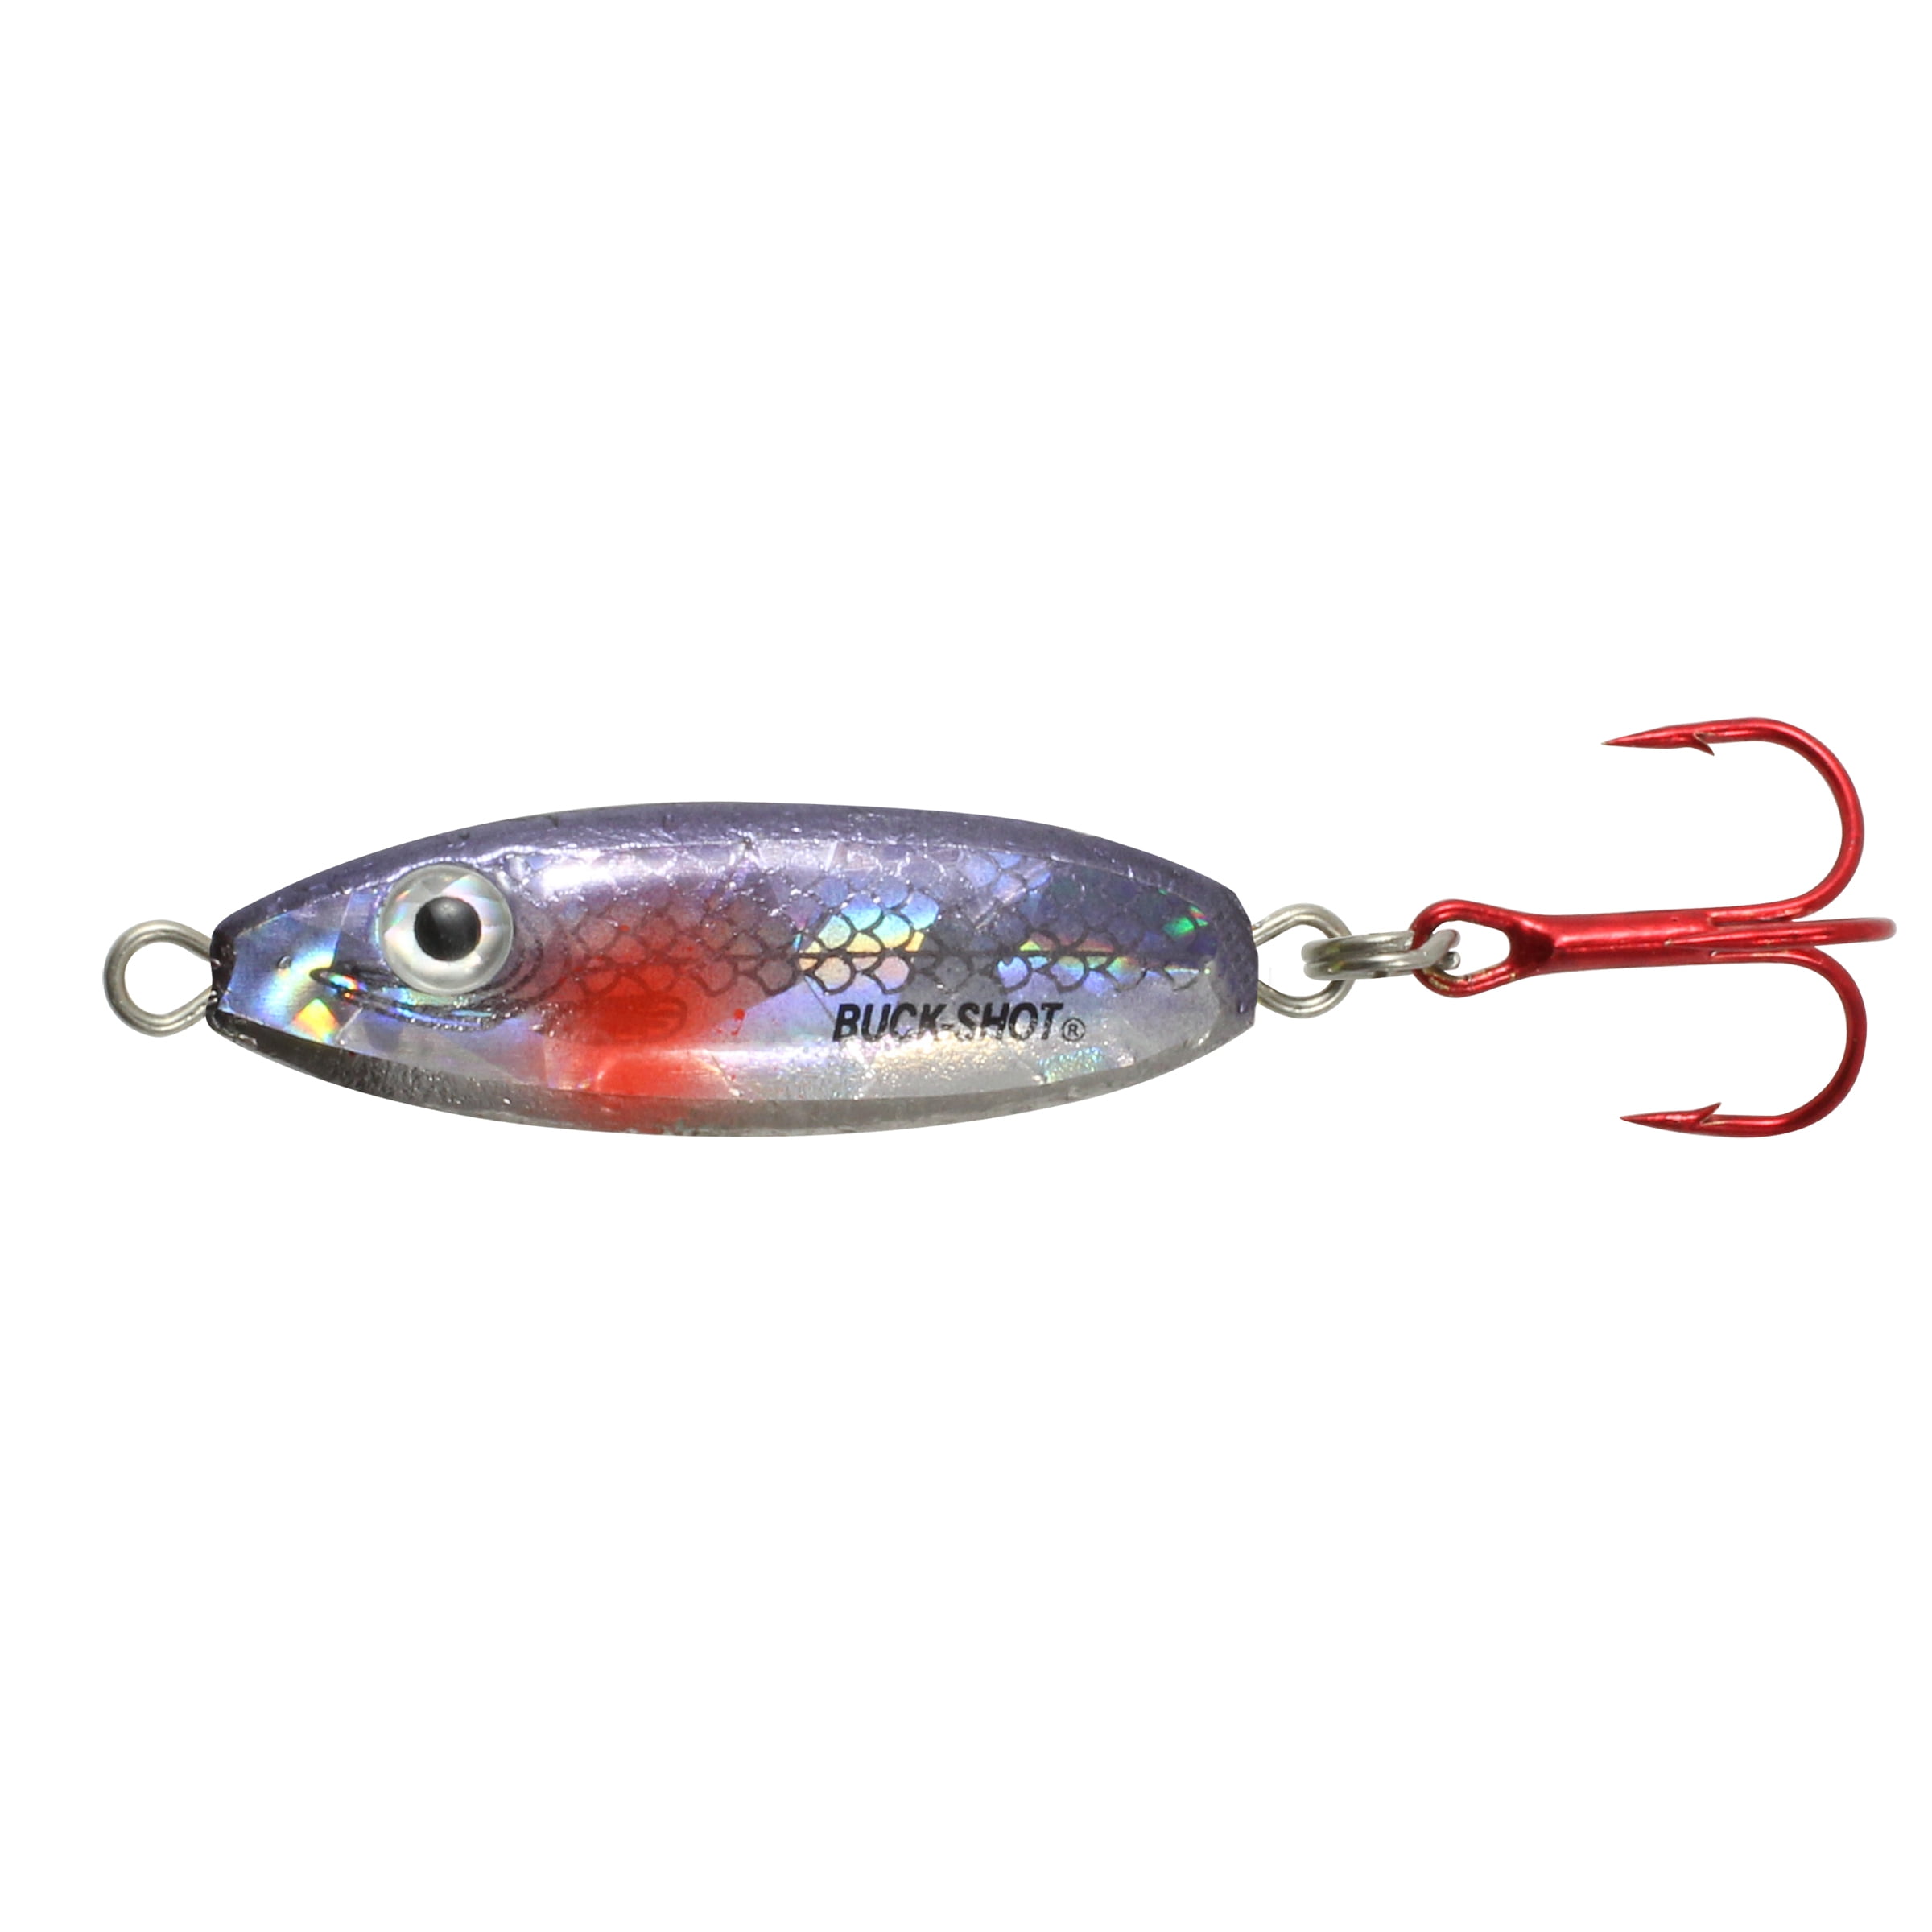 Northland Tackle Buck Shot Rattle Spoon, Freshwater, Silver Shiner